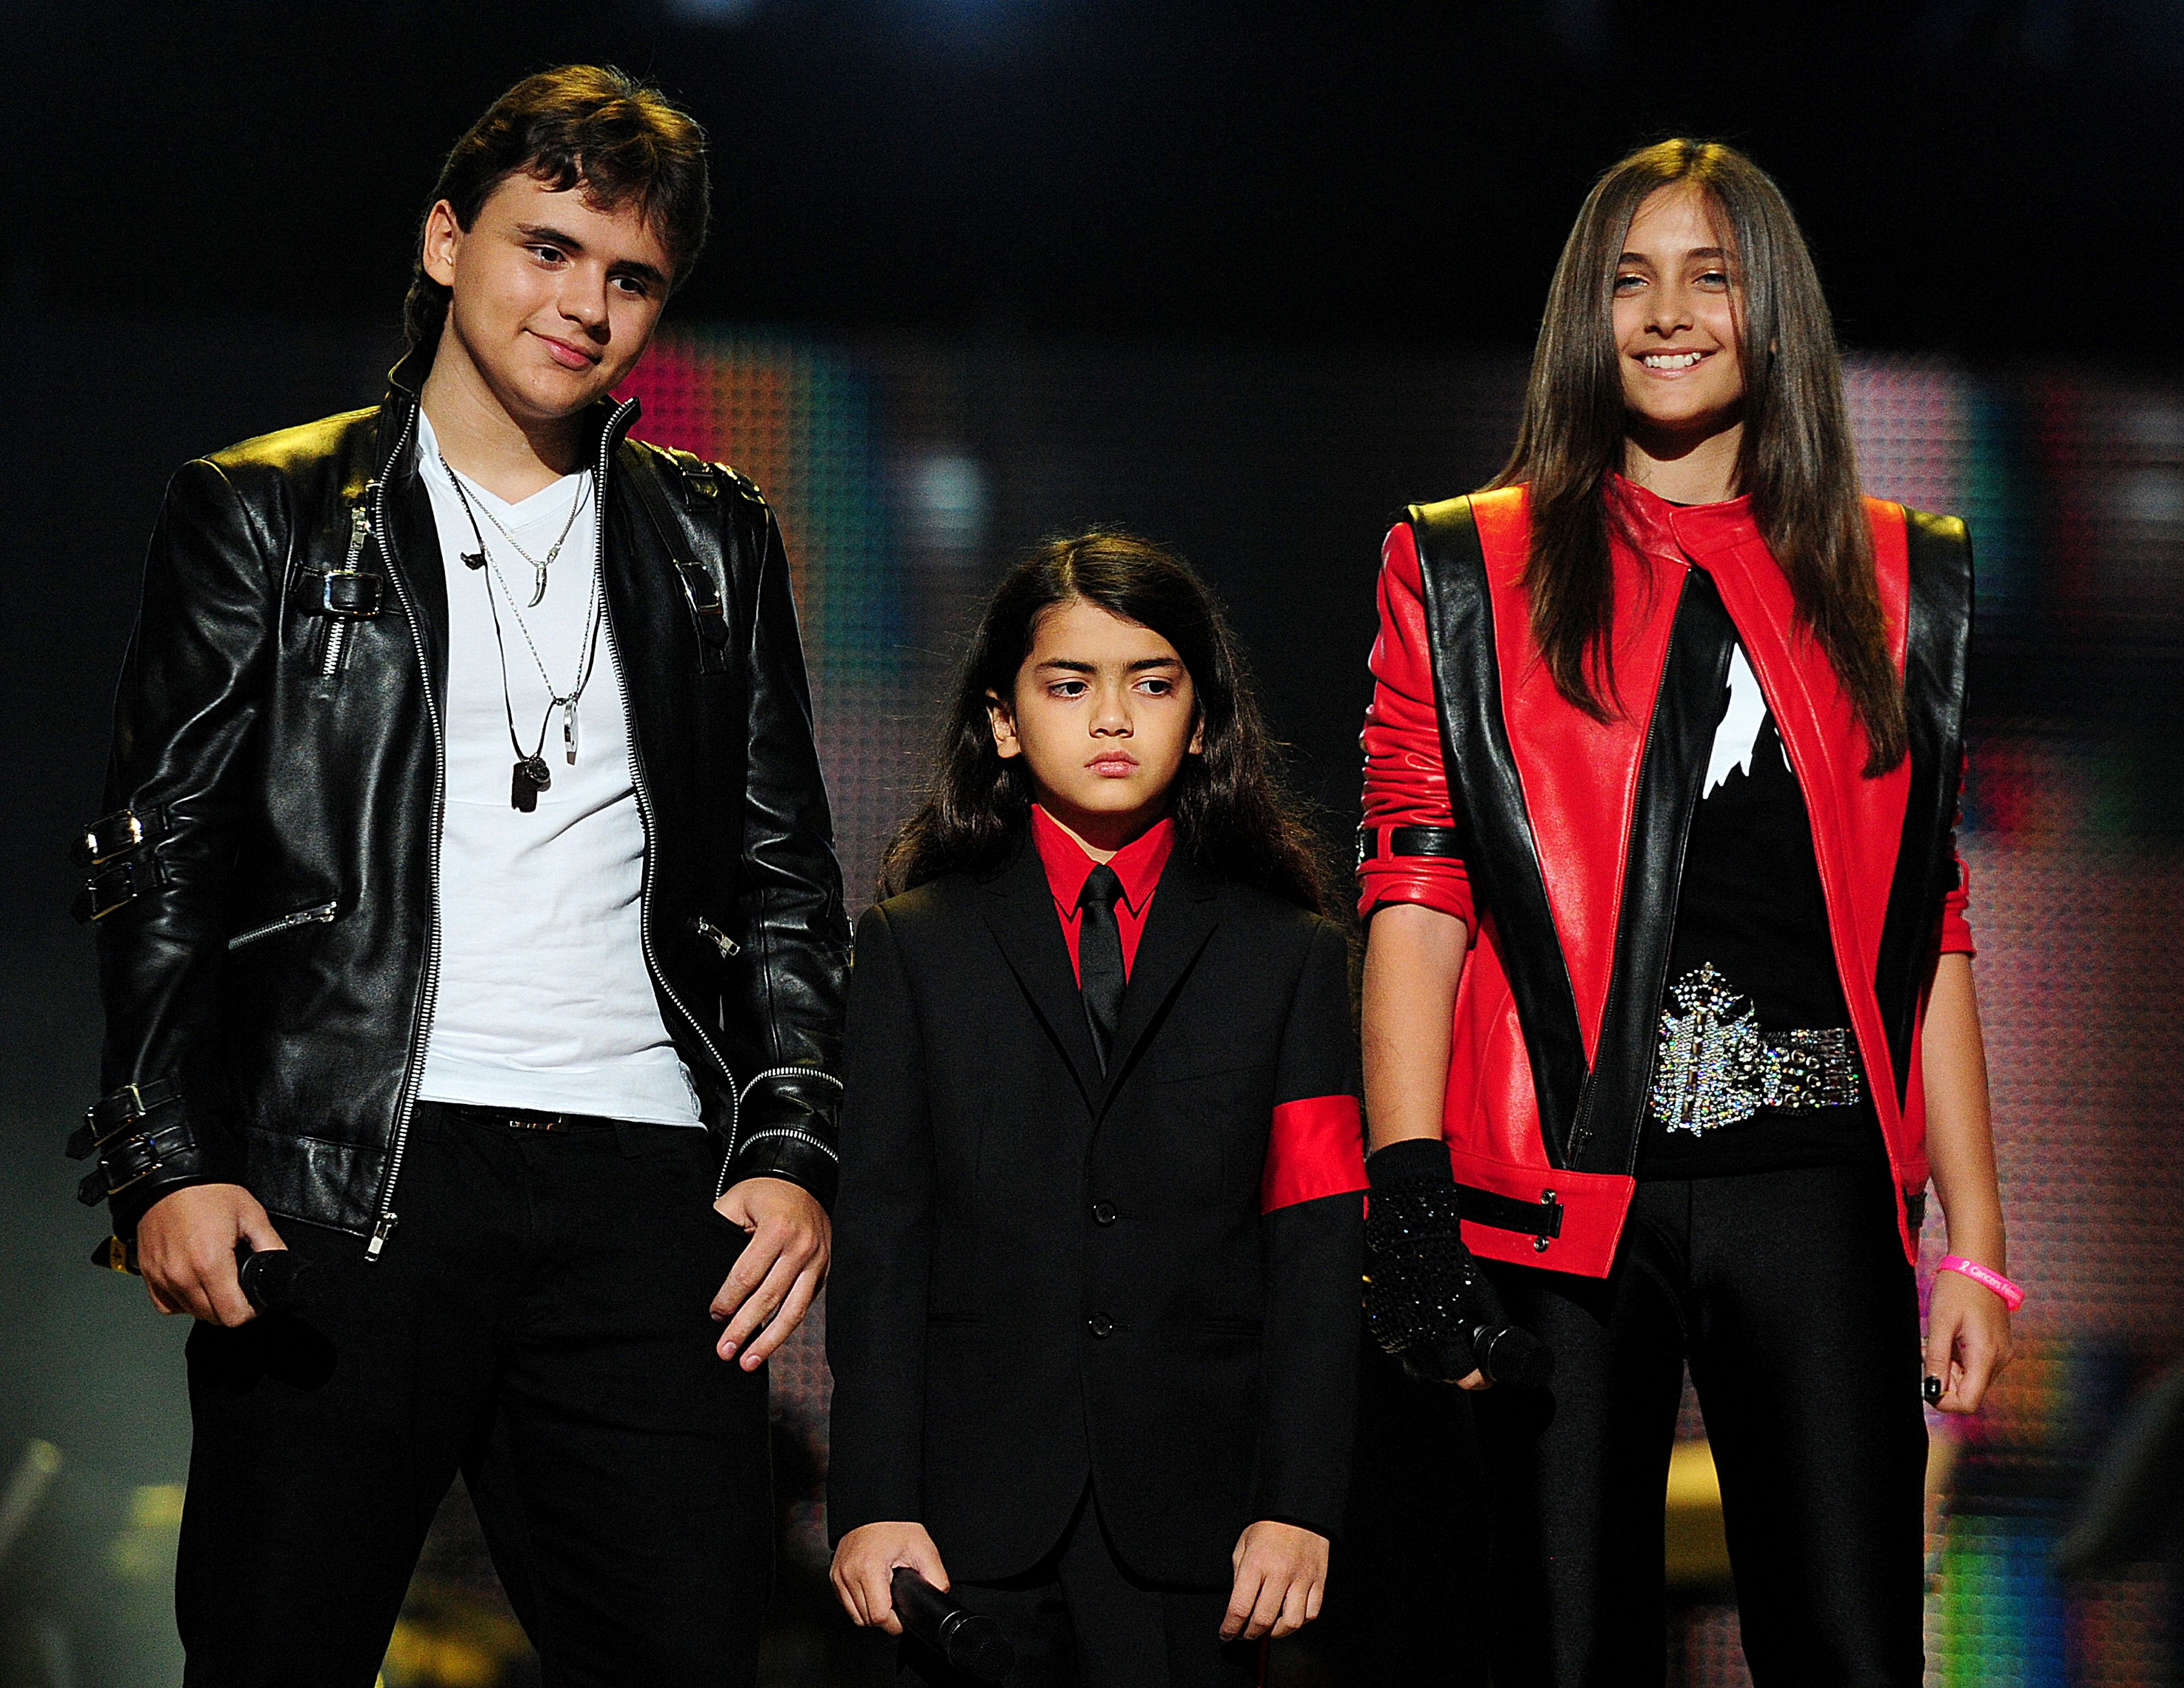 Prince, Blanket, and Paris Jackson on stage during the "Michael Forever" concert in memory of the late Michael Jackson in Cardiff, Wales, on October 8, 2011 | Source: Getty Images